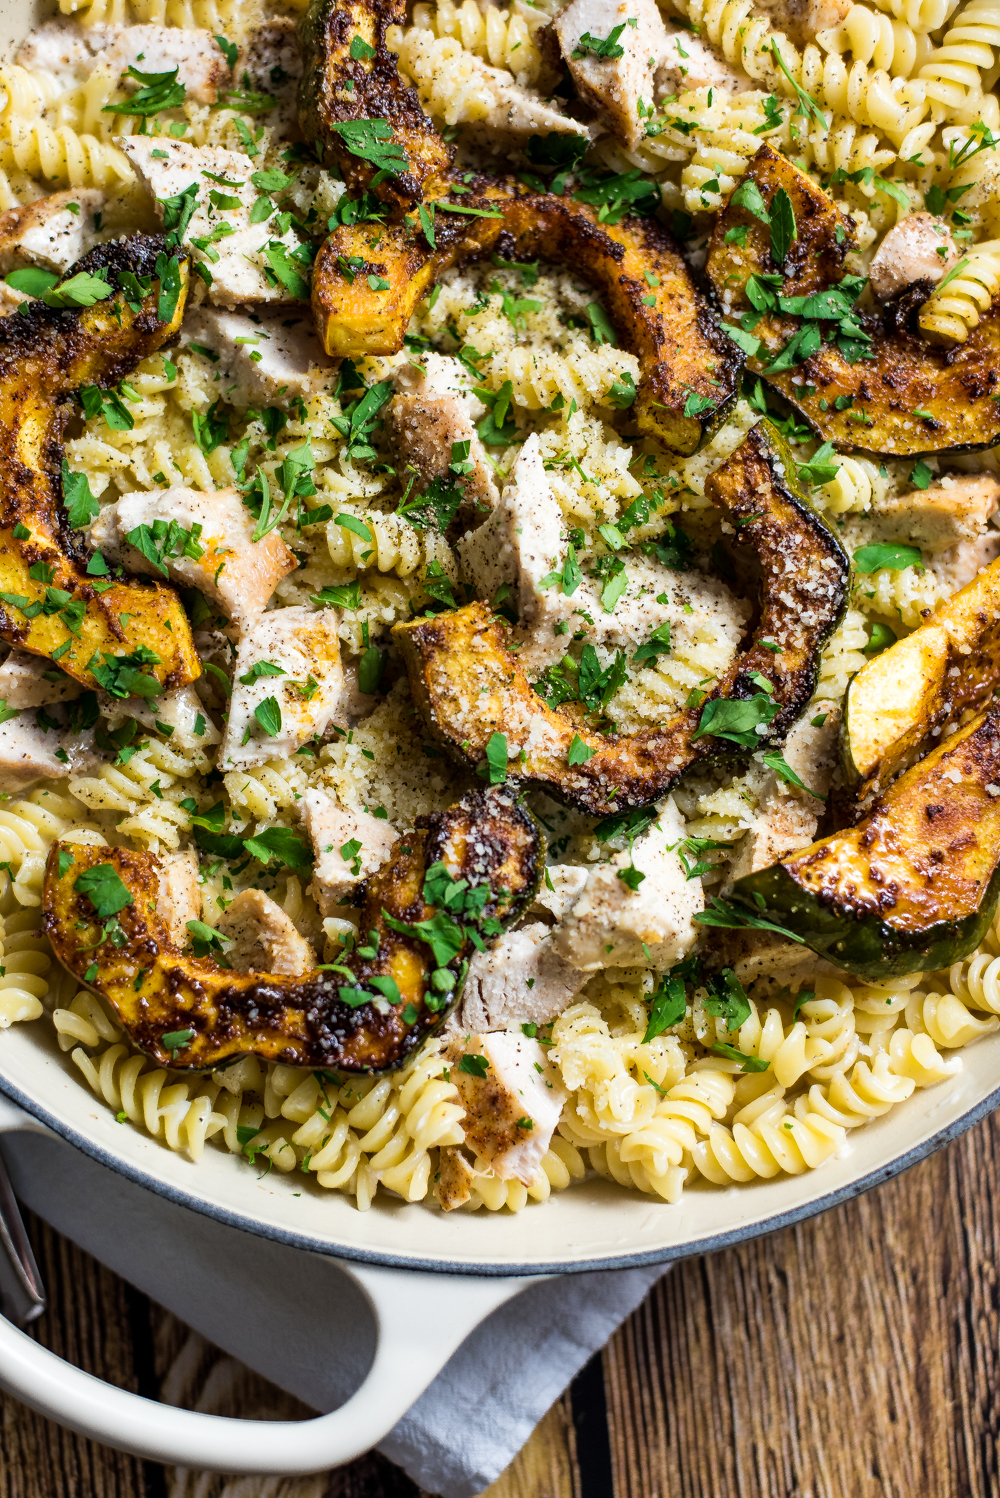 Chicken alfredo pasta with caramelized acorn squash is the perfect fall spin on traditional chicken alfredo. It's one big bowl of comfort!